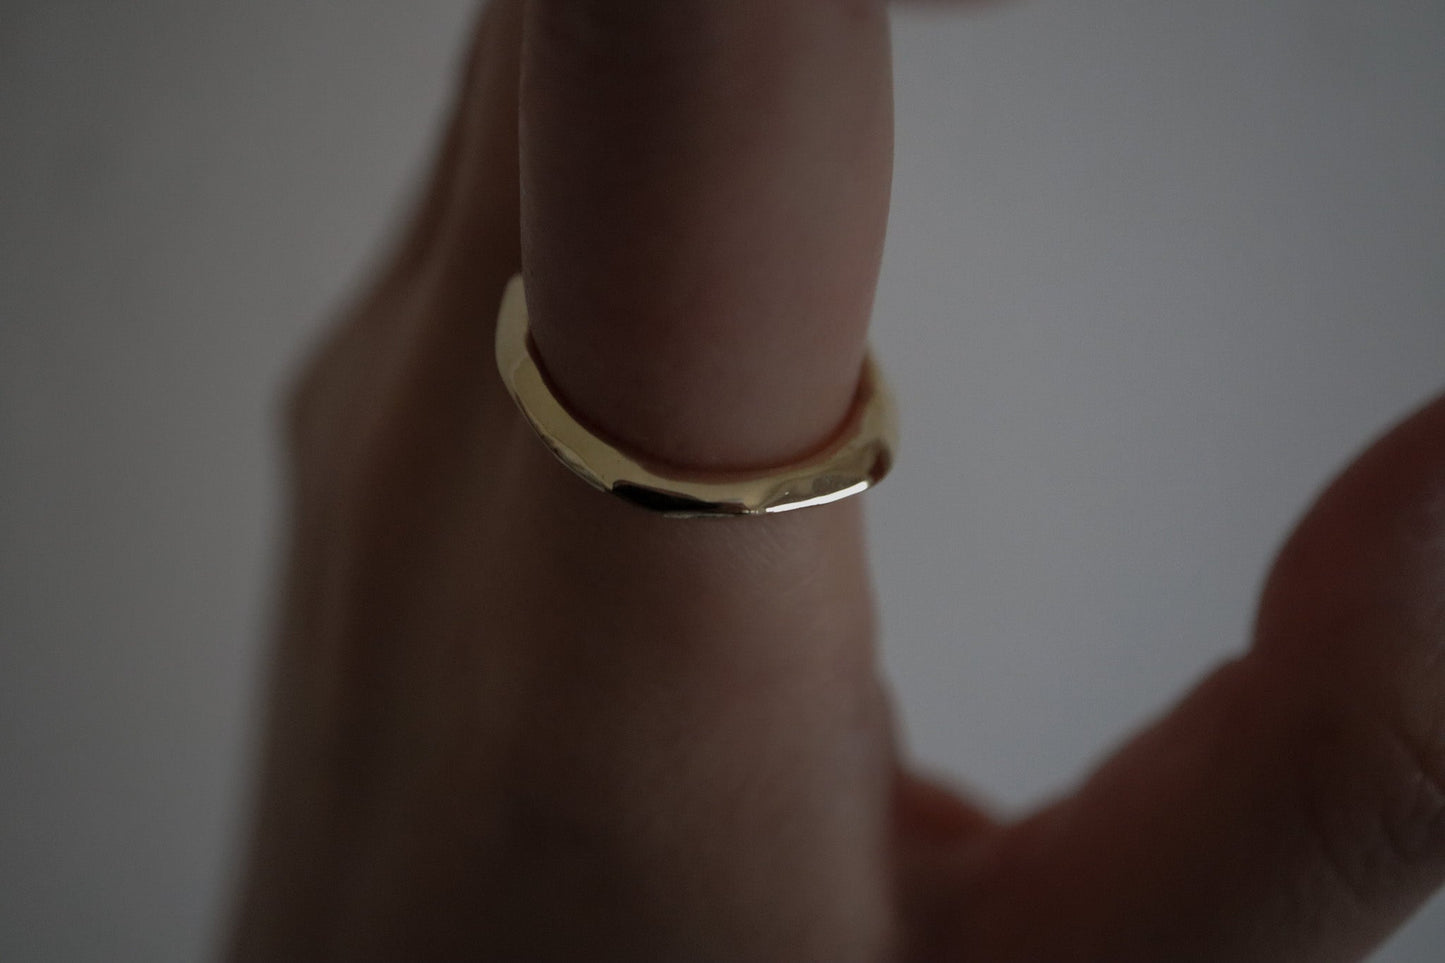 Layered ring / thin / silver / gold